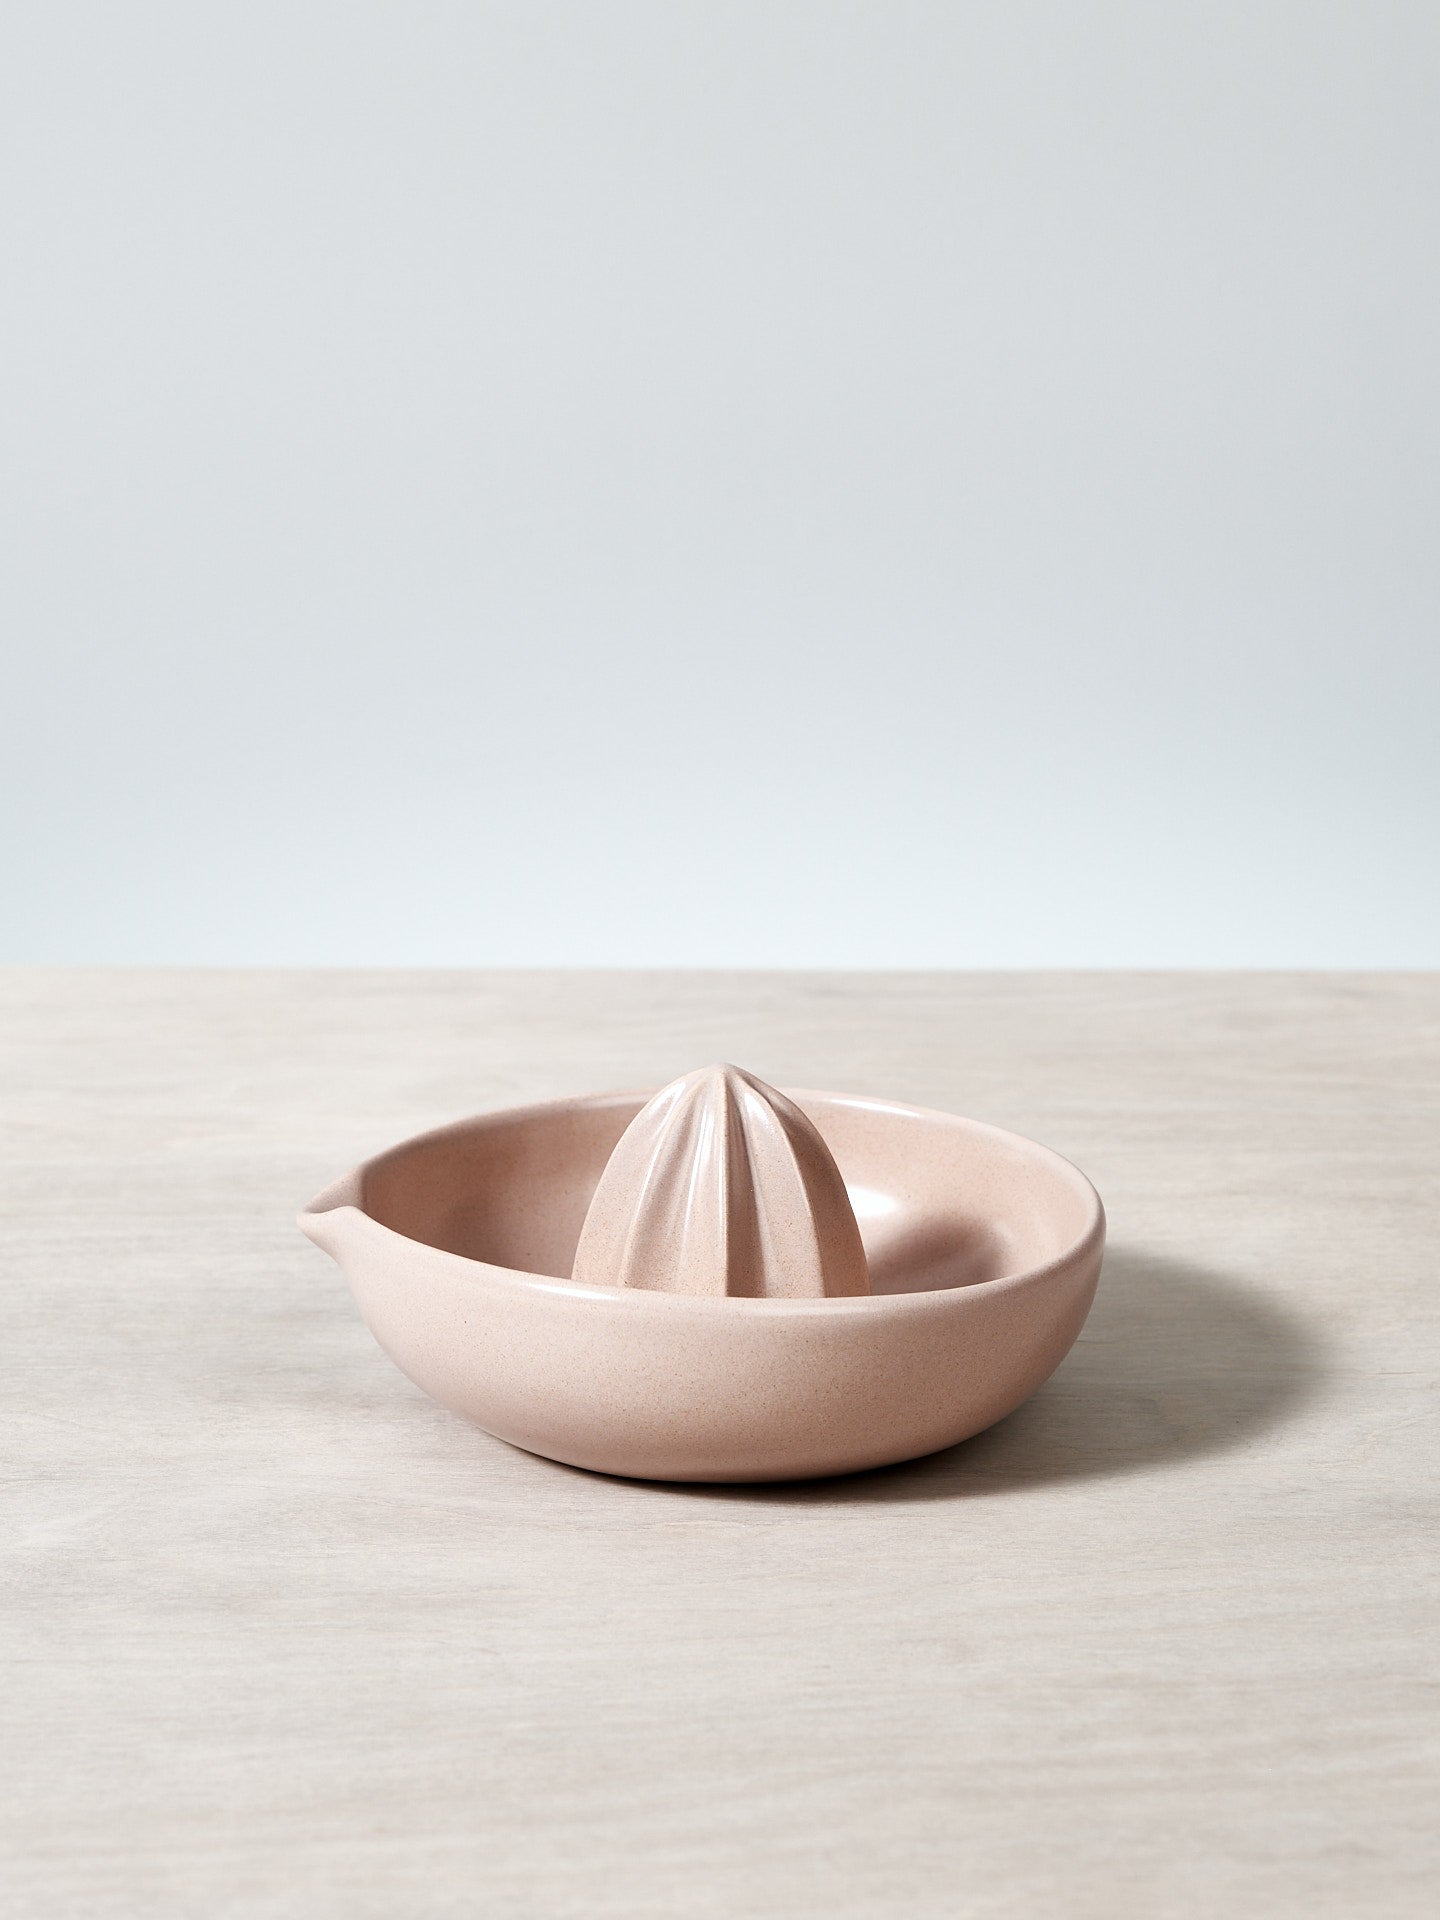 A pink Citrus Juicer – Dusty Pink by Gidon Bing sitting on top of a wooden table.